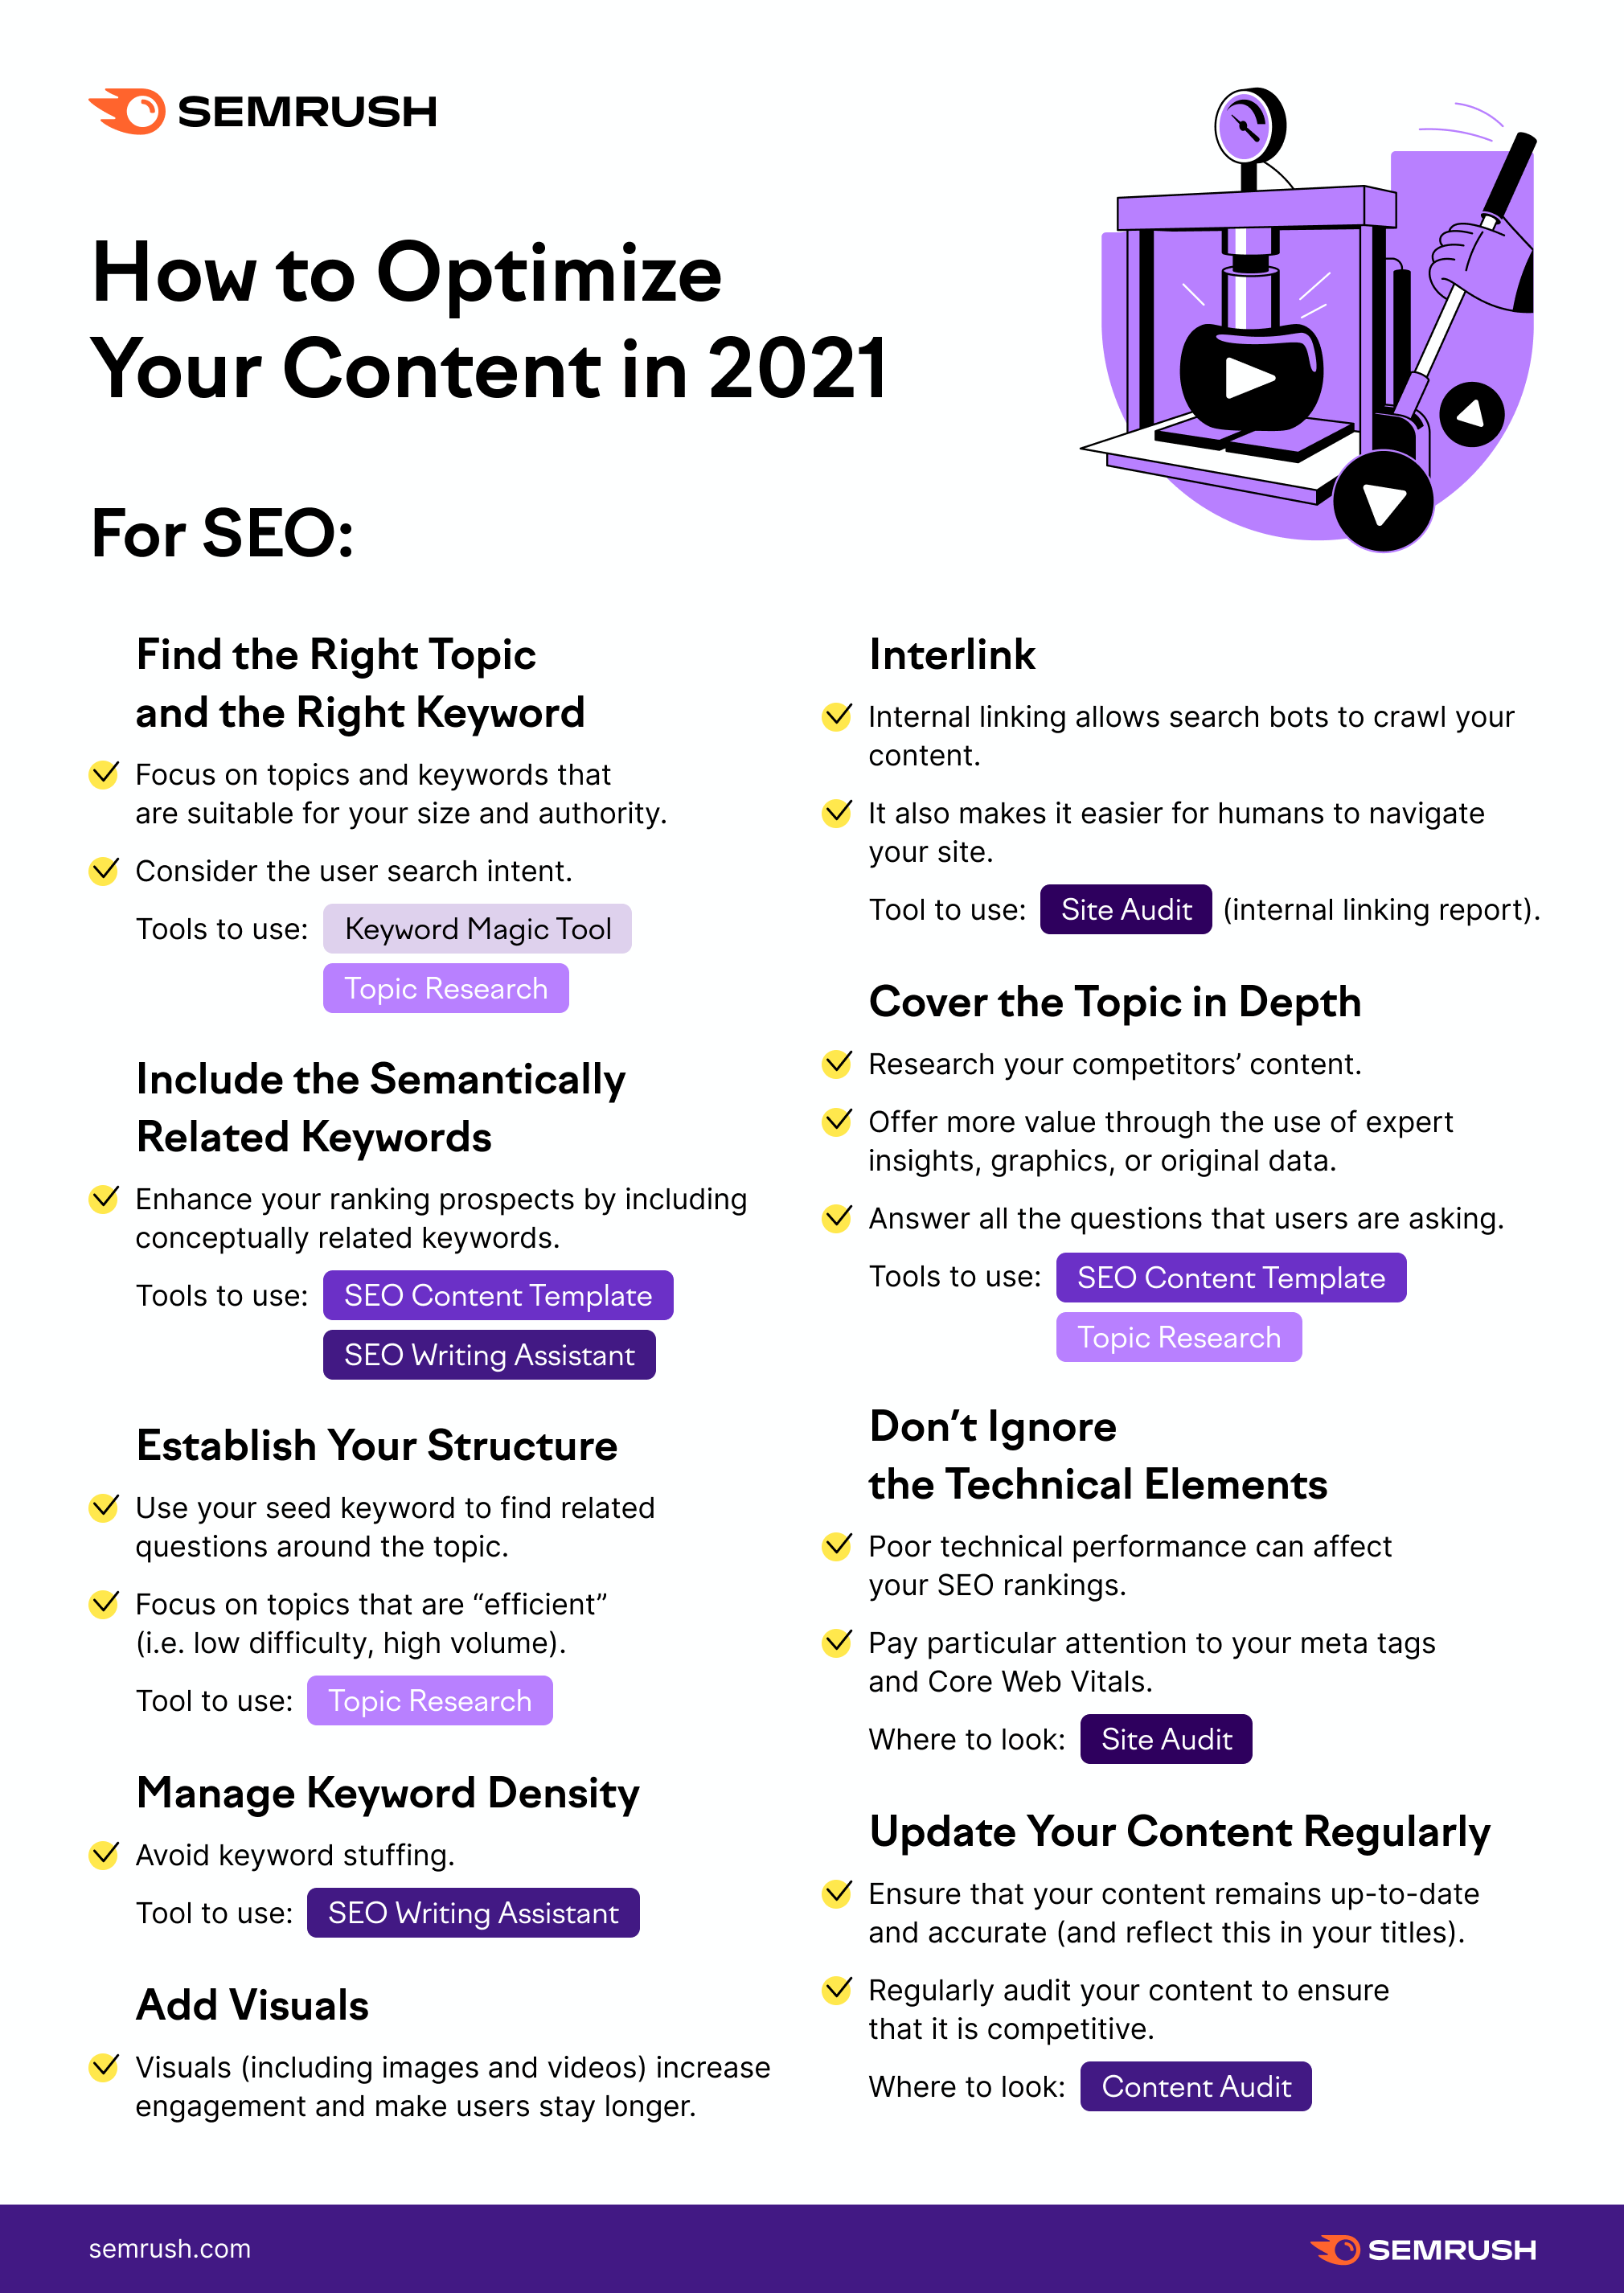 Infographic: content optimization - optimizing content for SEO